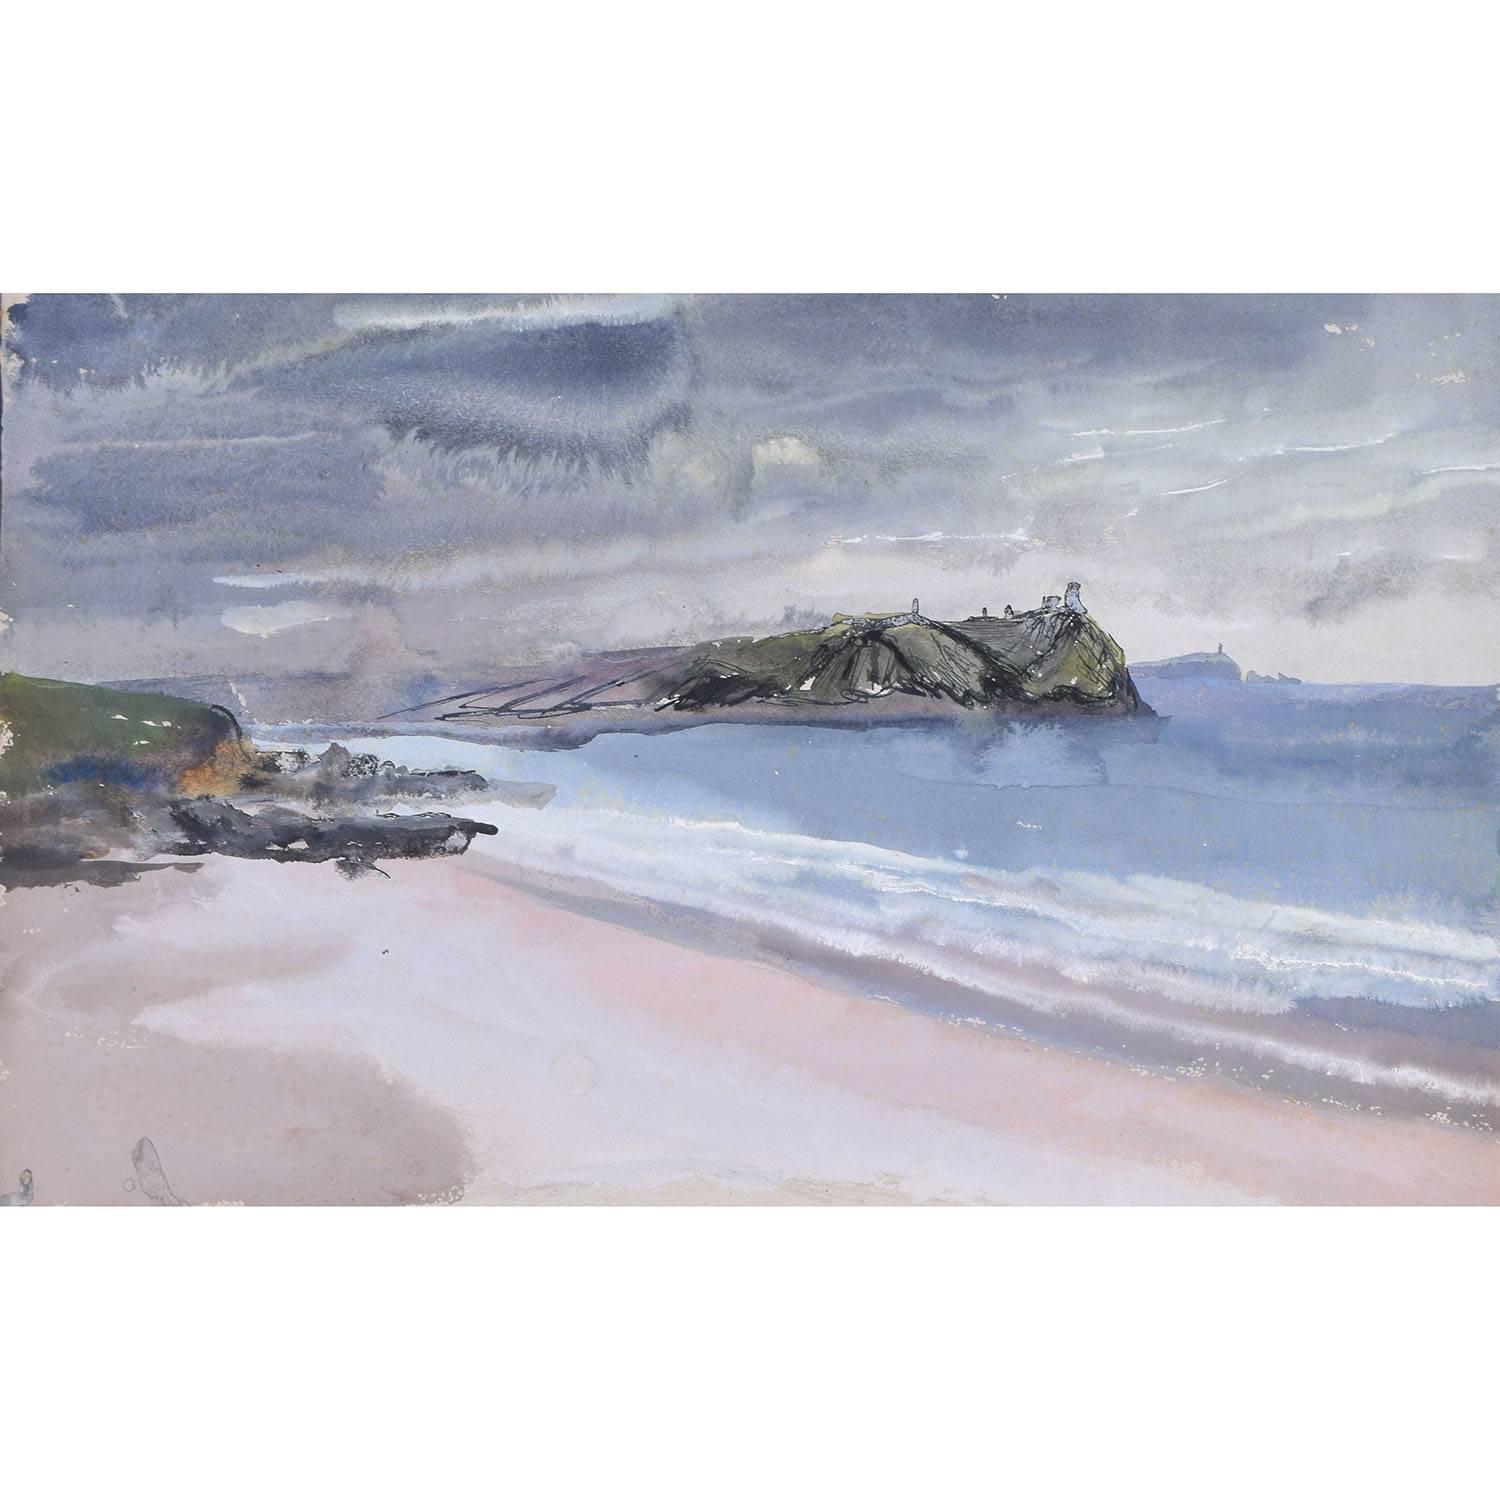 We acquired a series of paintings and posters from Clifford and Rosemary Ellis's studio. To find more scroll down to "More from this Seller" and below it click on "See all from this seller." 

Clifford Ellis (1907-1985)
Teignmouth Beach, Devon